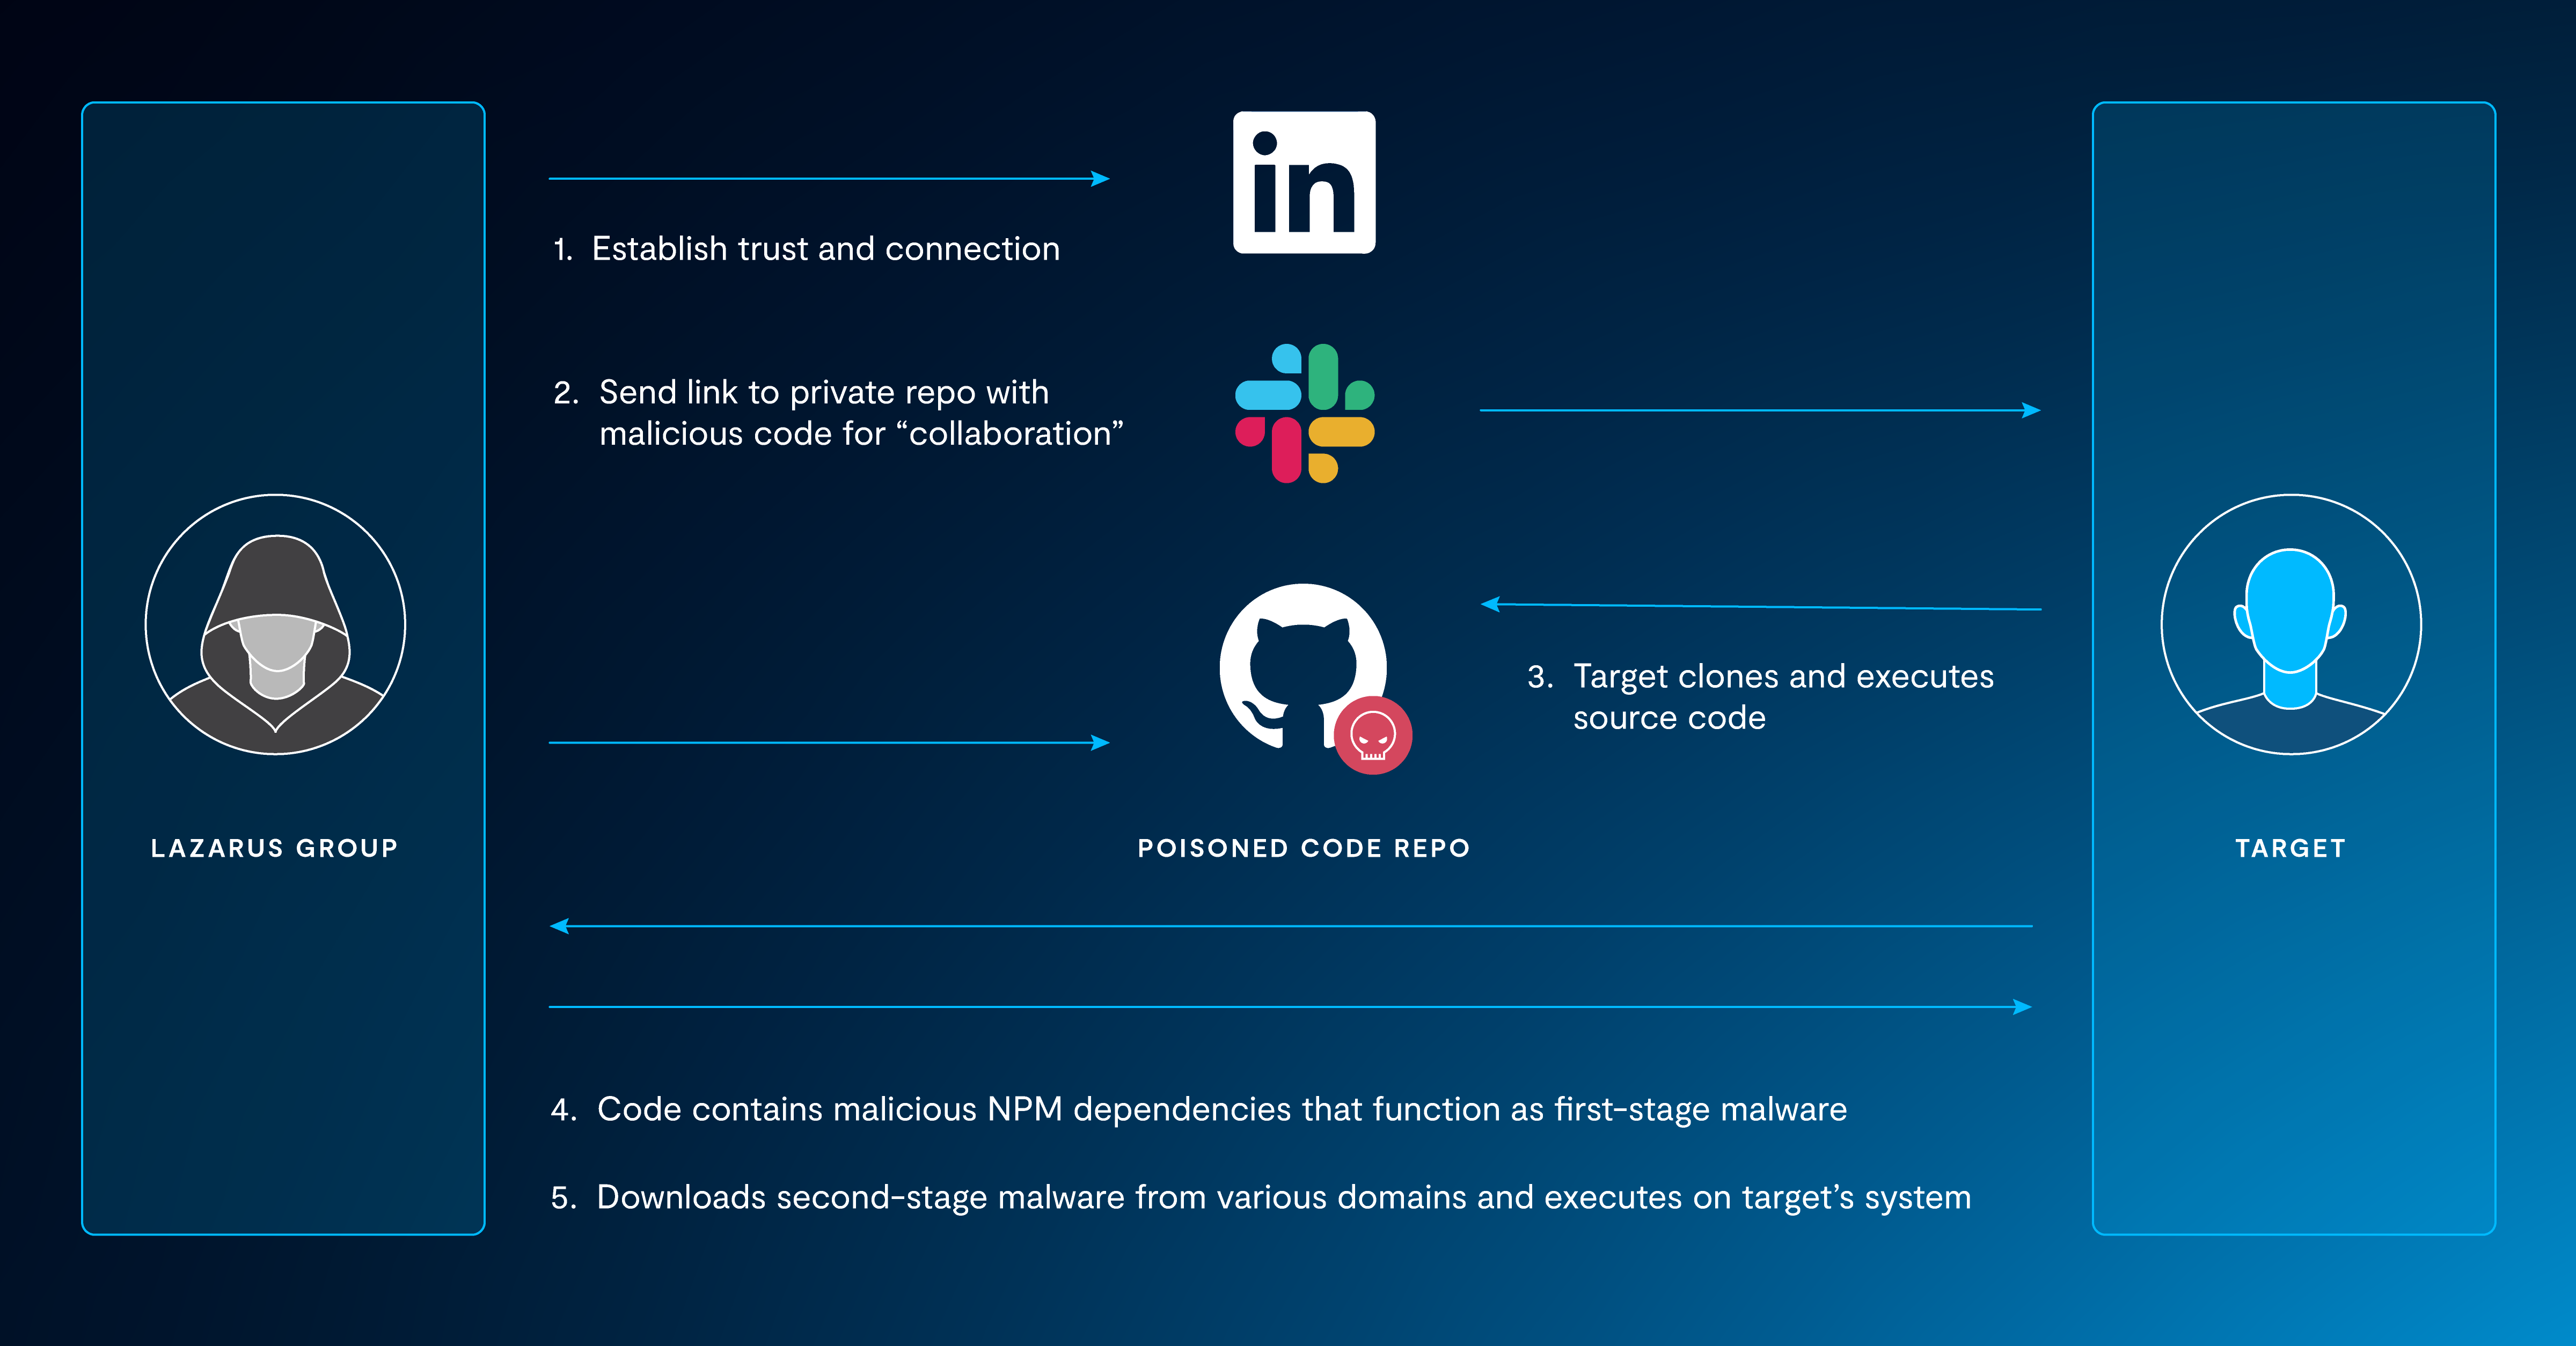 Diagram demonstrating these steps:
1. Lazarus establishes trust on LinkedIn
2. Lazarus sends a link to a private repo with malicious code for collaboration over Slack
3. The target clones and executes the poisoned code repo
4. Code contains malicious NPM dependencies that function as first-stage malware
5. Downloads second-stage malware from various domains and executes on the target's system.